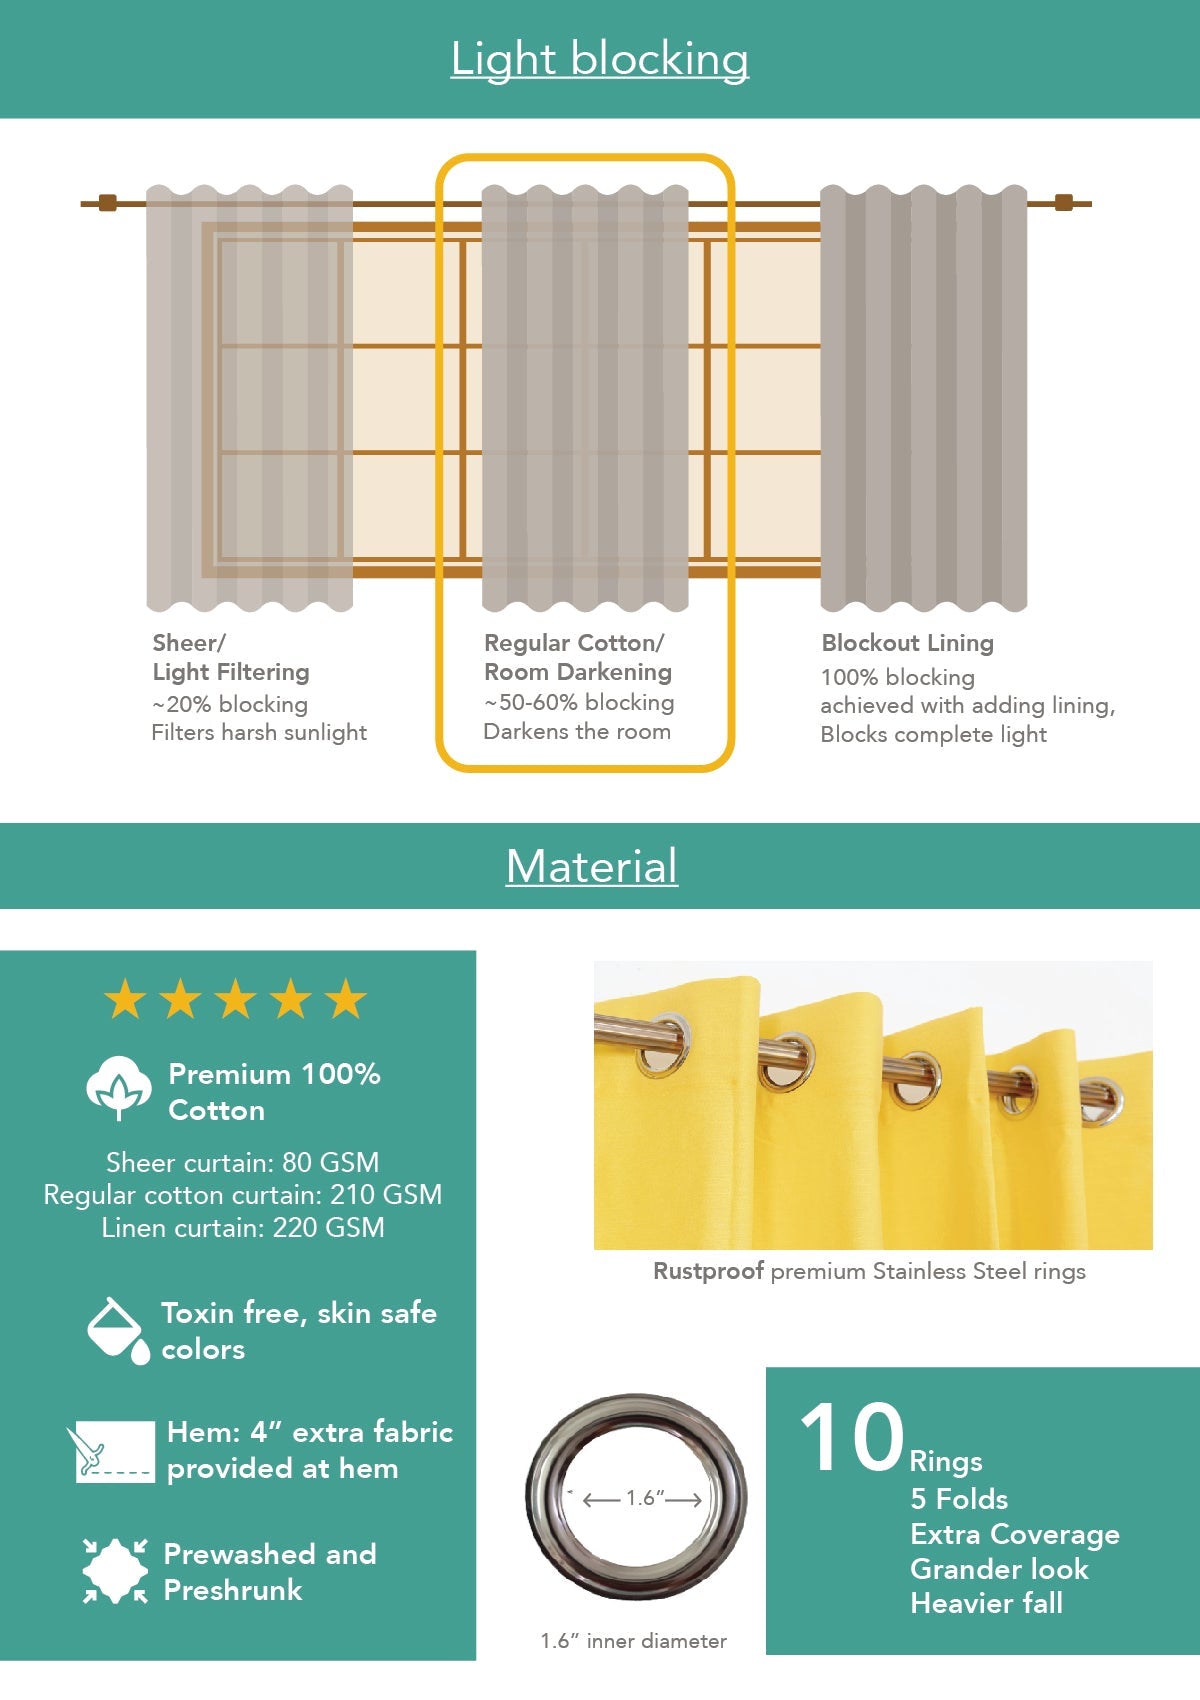 Winged Skies, Uneven Checks Grey Sheer Set Of 4 Combo Cotton Curtain - Yellow Grey